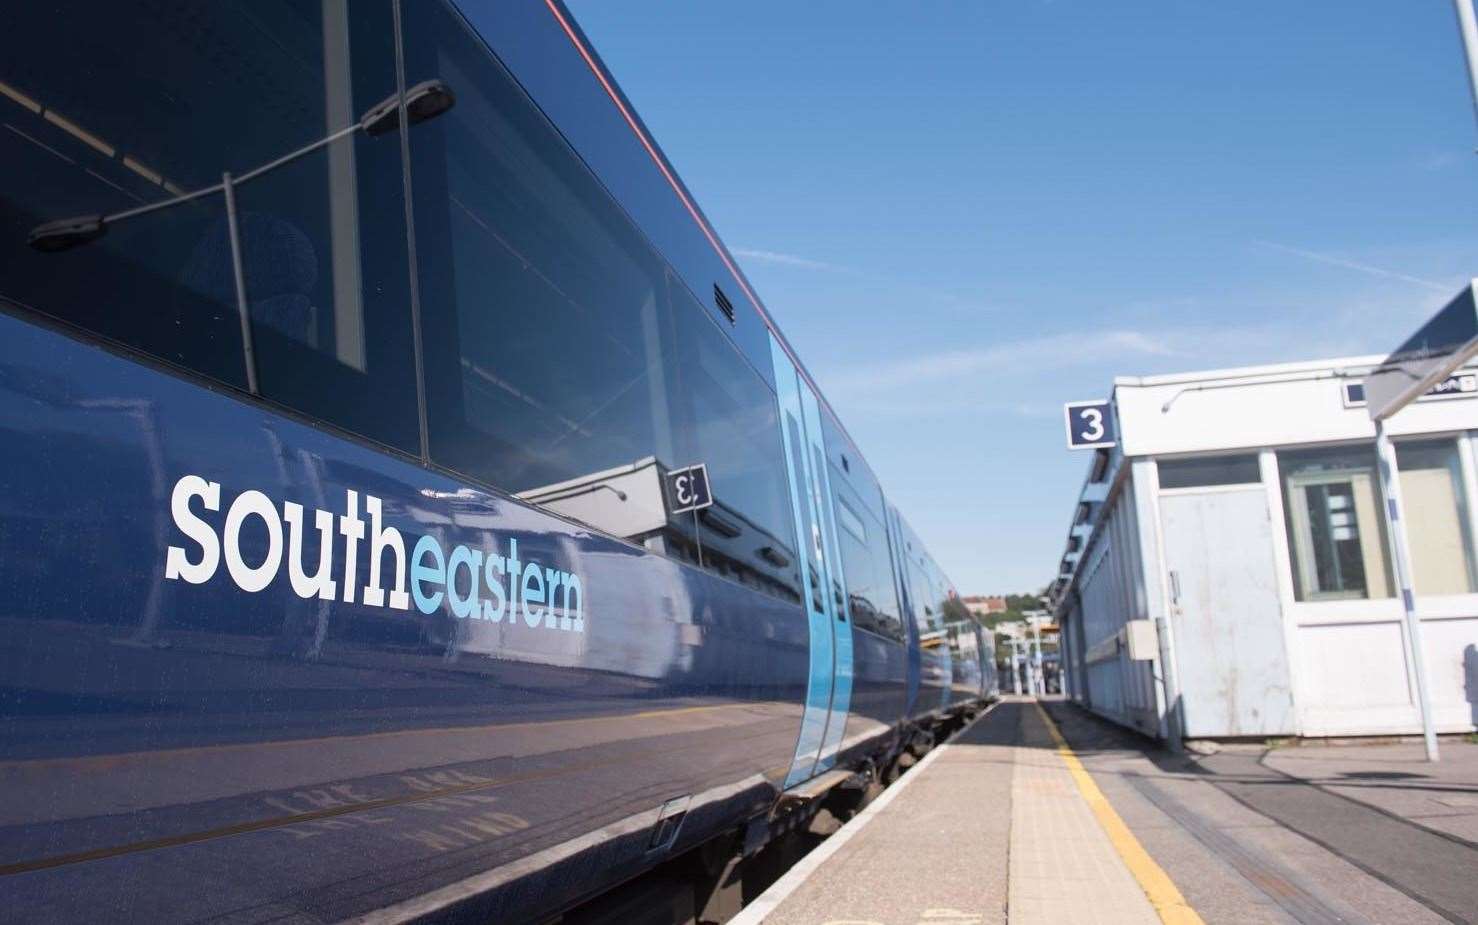 Southeastern train services via Maidstone East are being disrupted